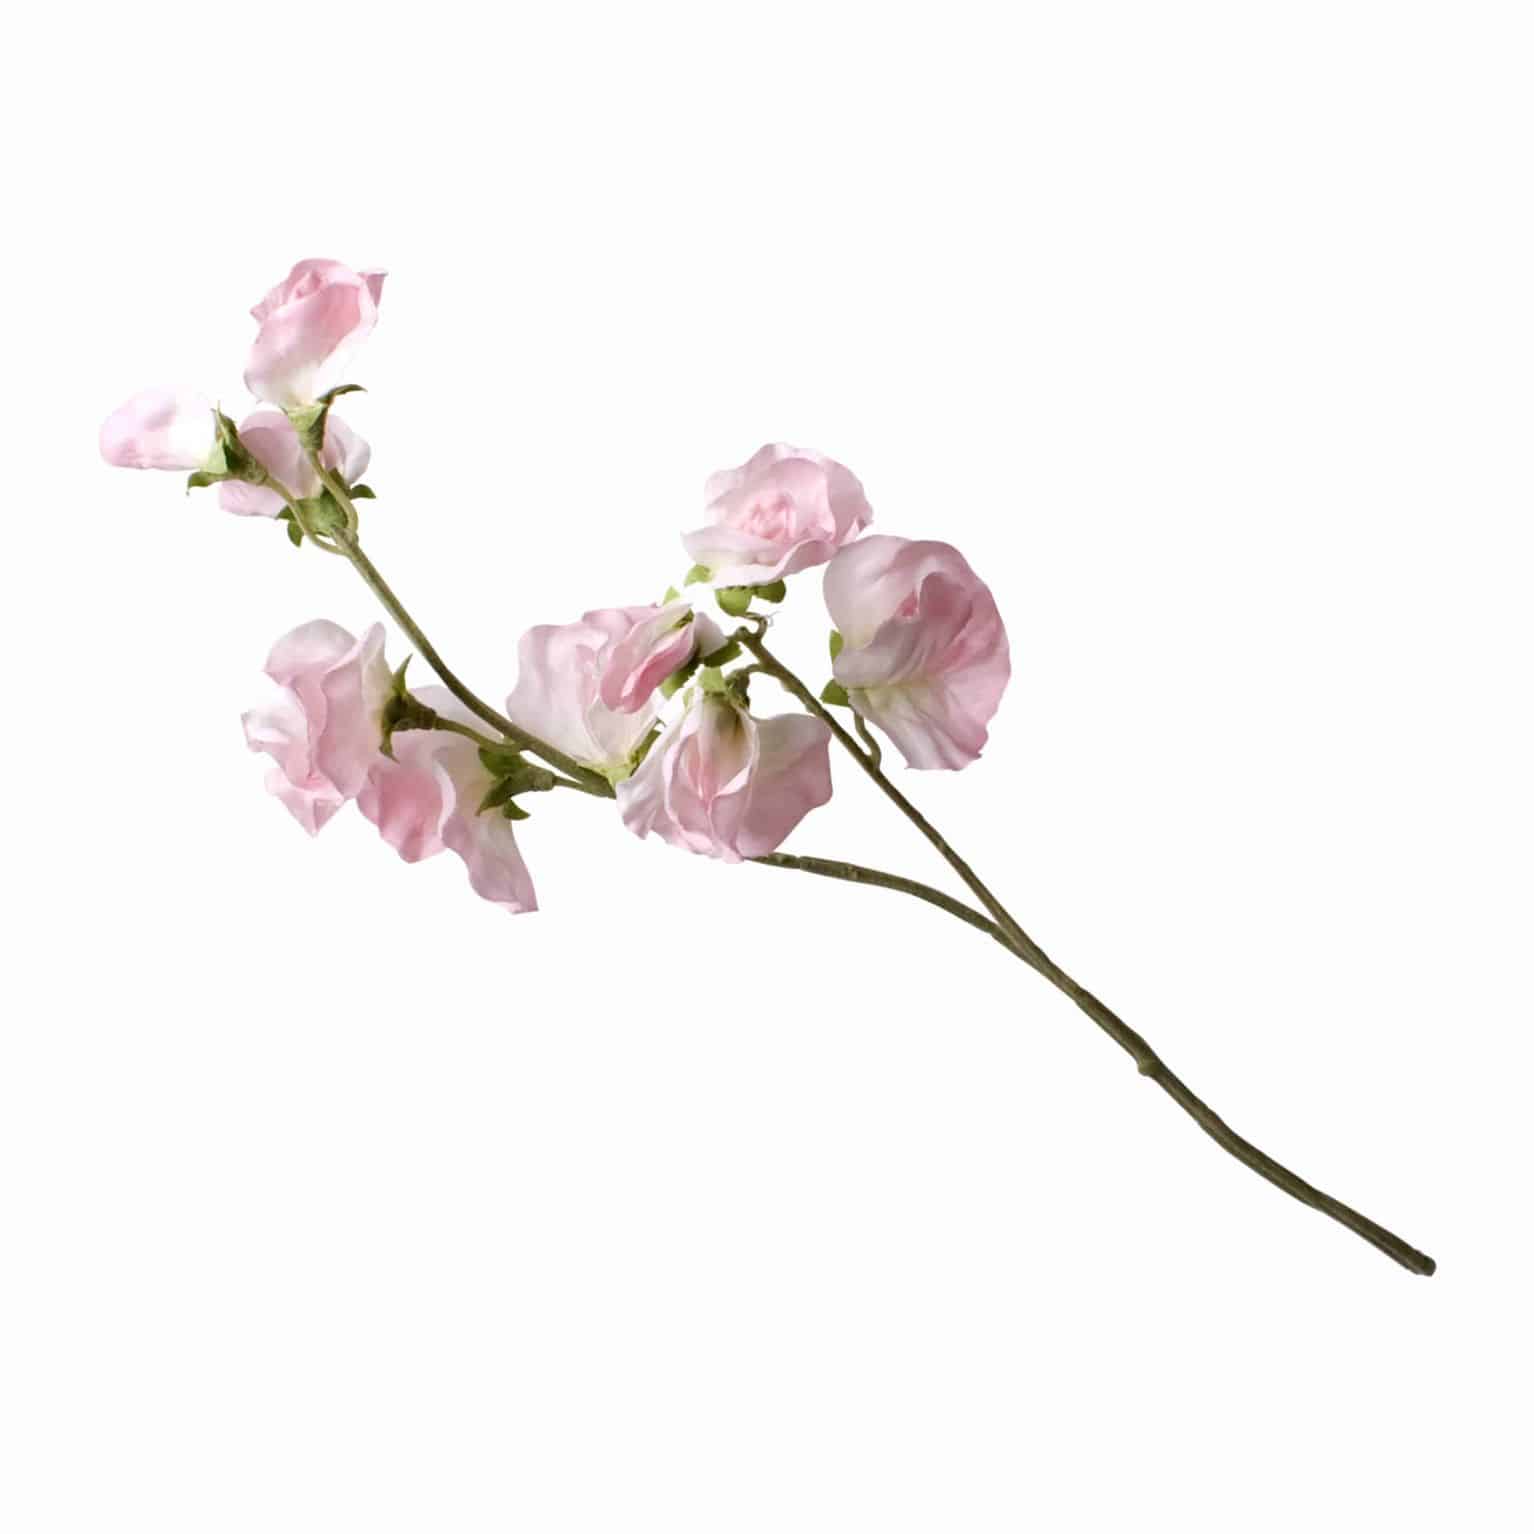 Buy luxurious light pink faux sweet pea flowers in immaculate detail. A delightful addition to any arrangement